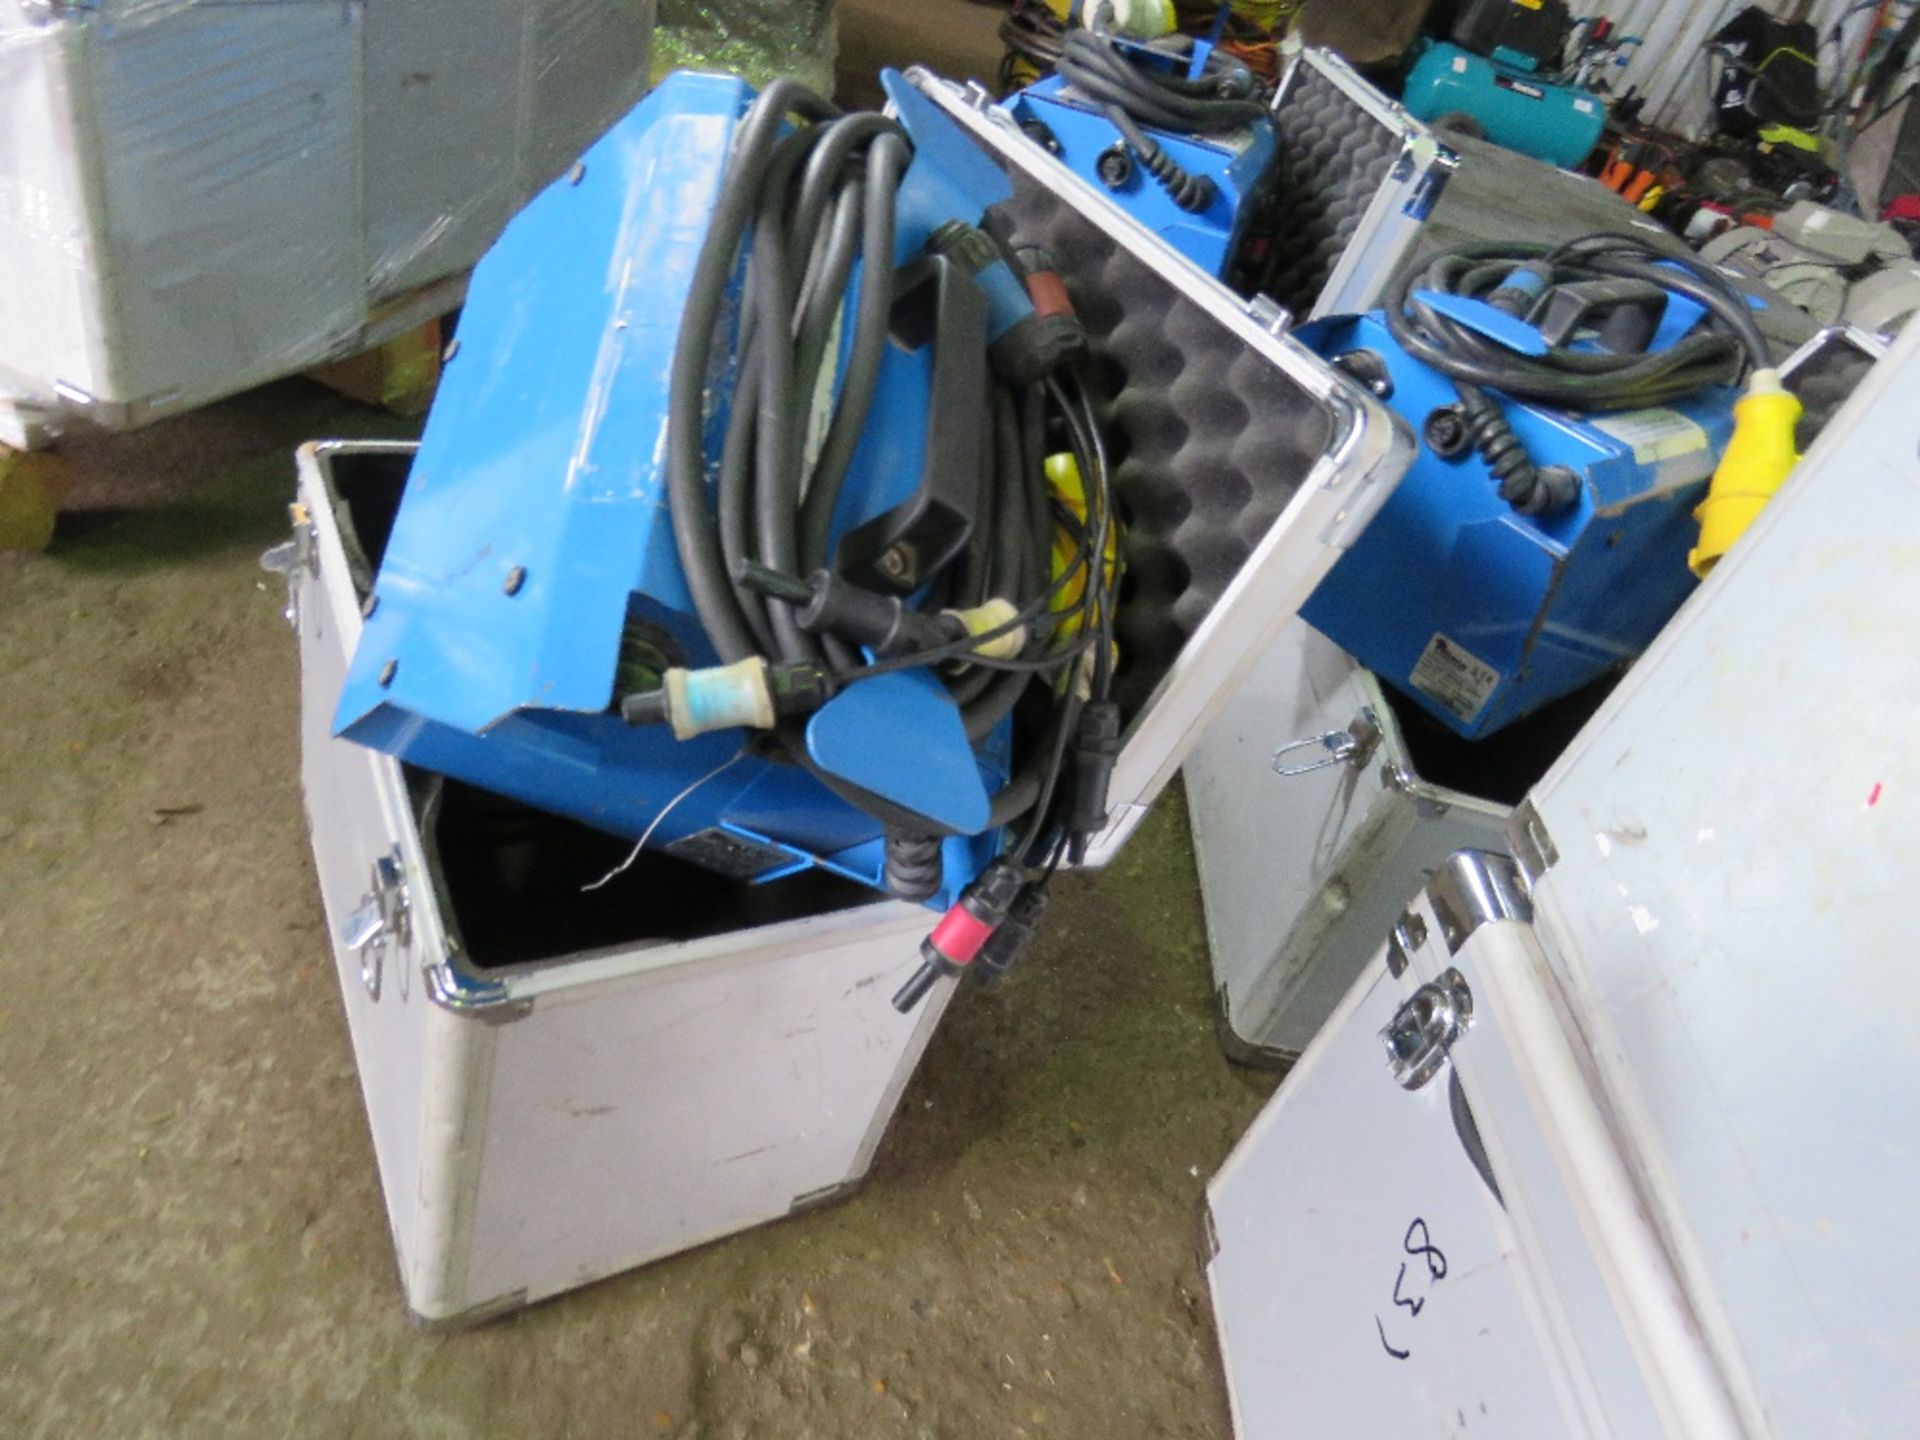 1 X UNIVERSAL S-315 110VOLT 2470W DRAINAGE PIPE FUSION WELDER UNIT. IN CASE WITH CABLES ETC. - Image 3 of 4